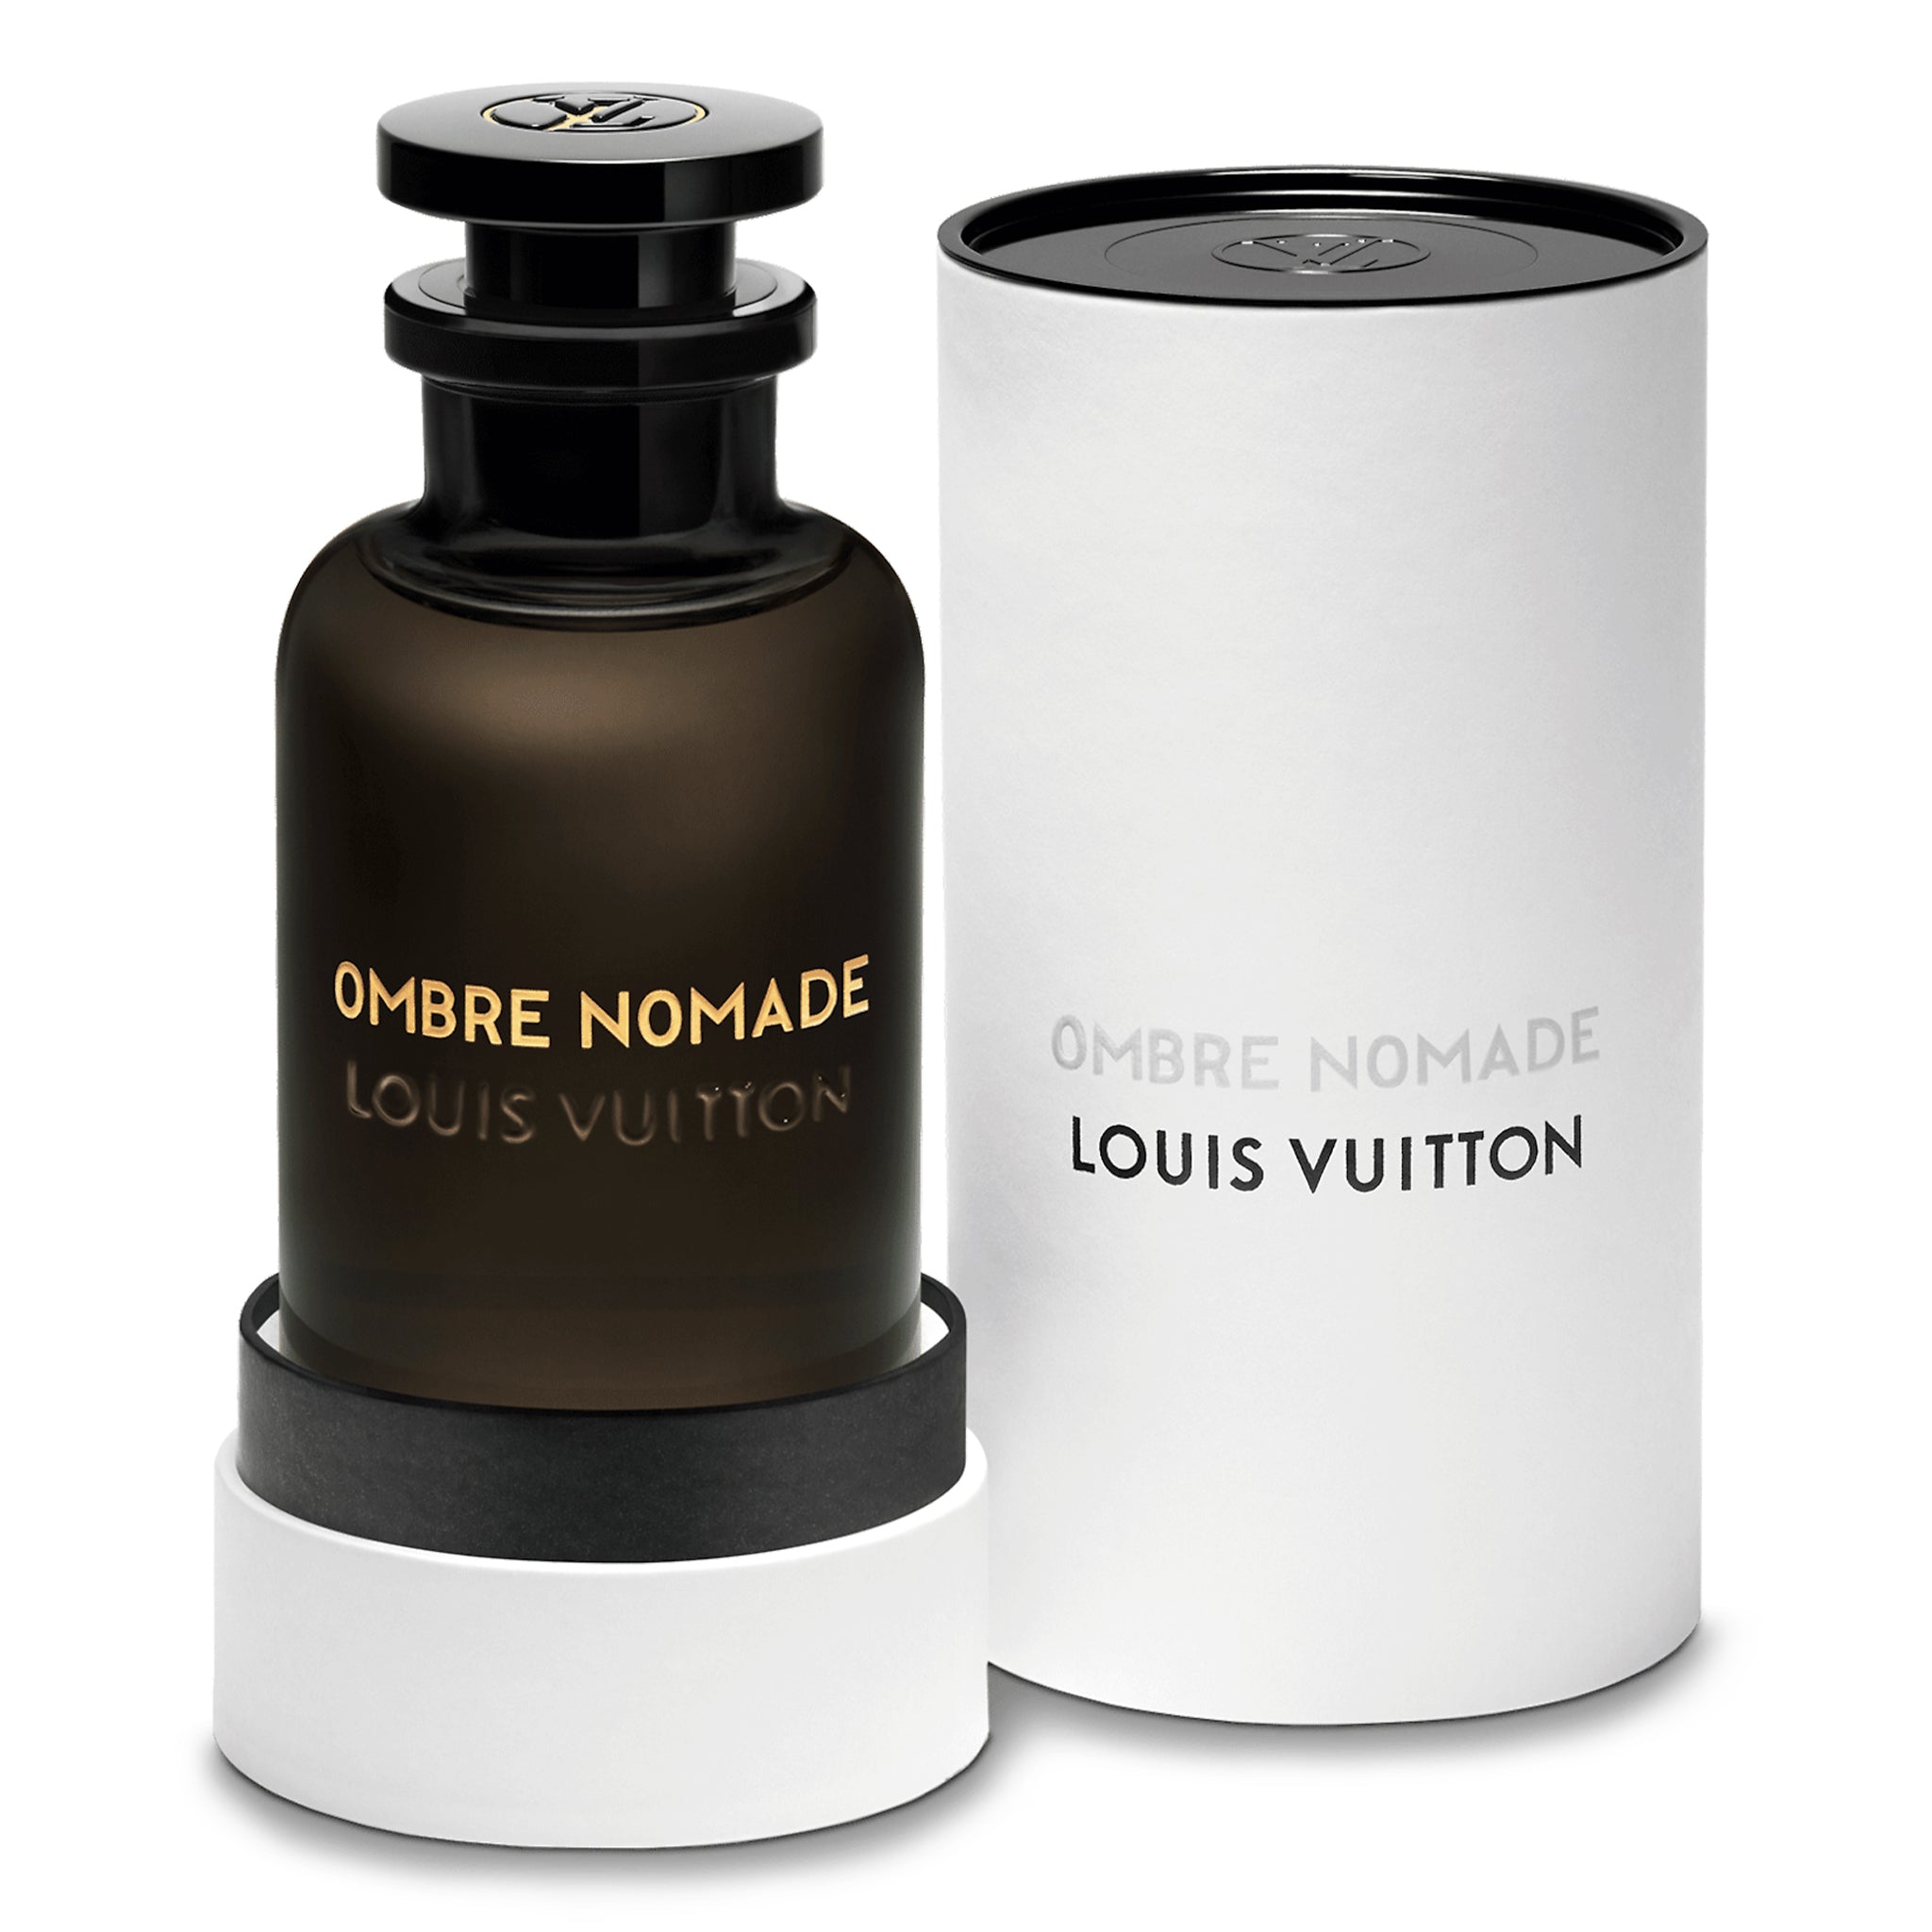 if you love Louis Vuitton Ombre Nomade, Nomadic Shadow 11 from